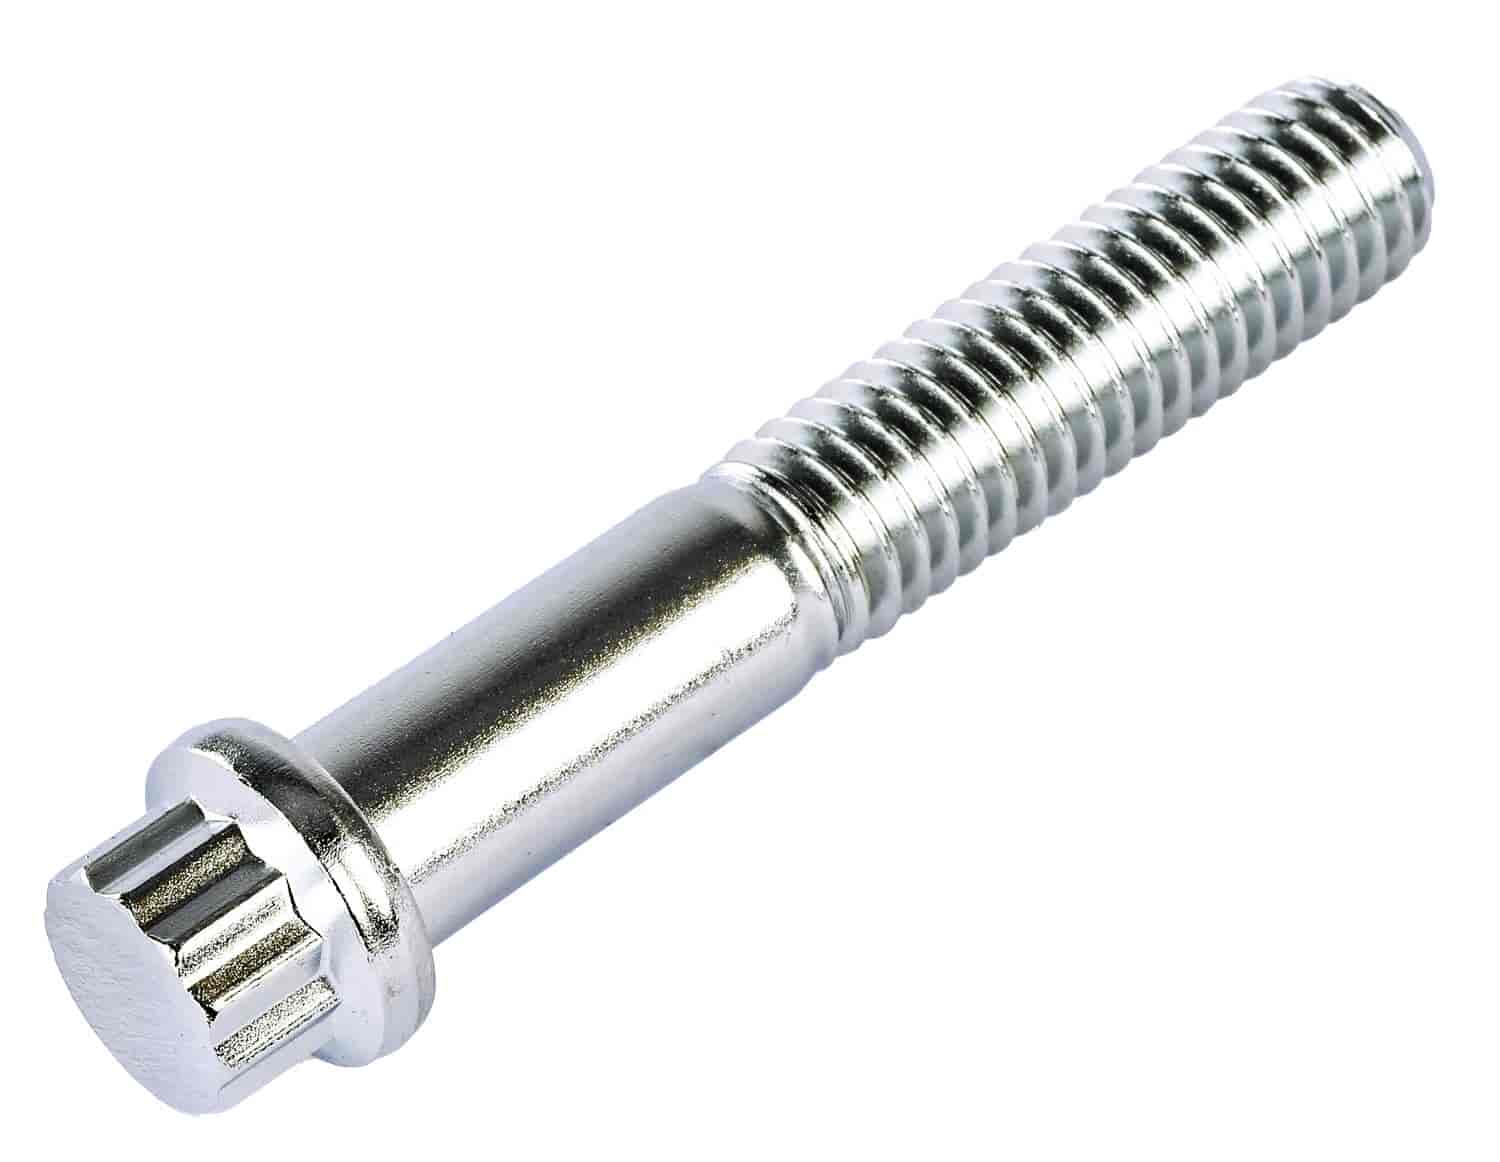 12-Point Fastener [3/8 in. -16 Thread x 2 1/4 (.250) in. Length]